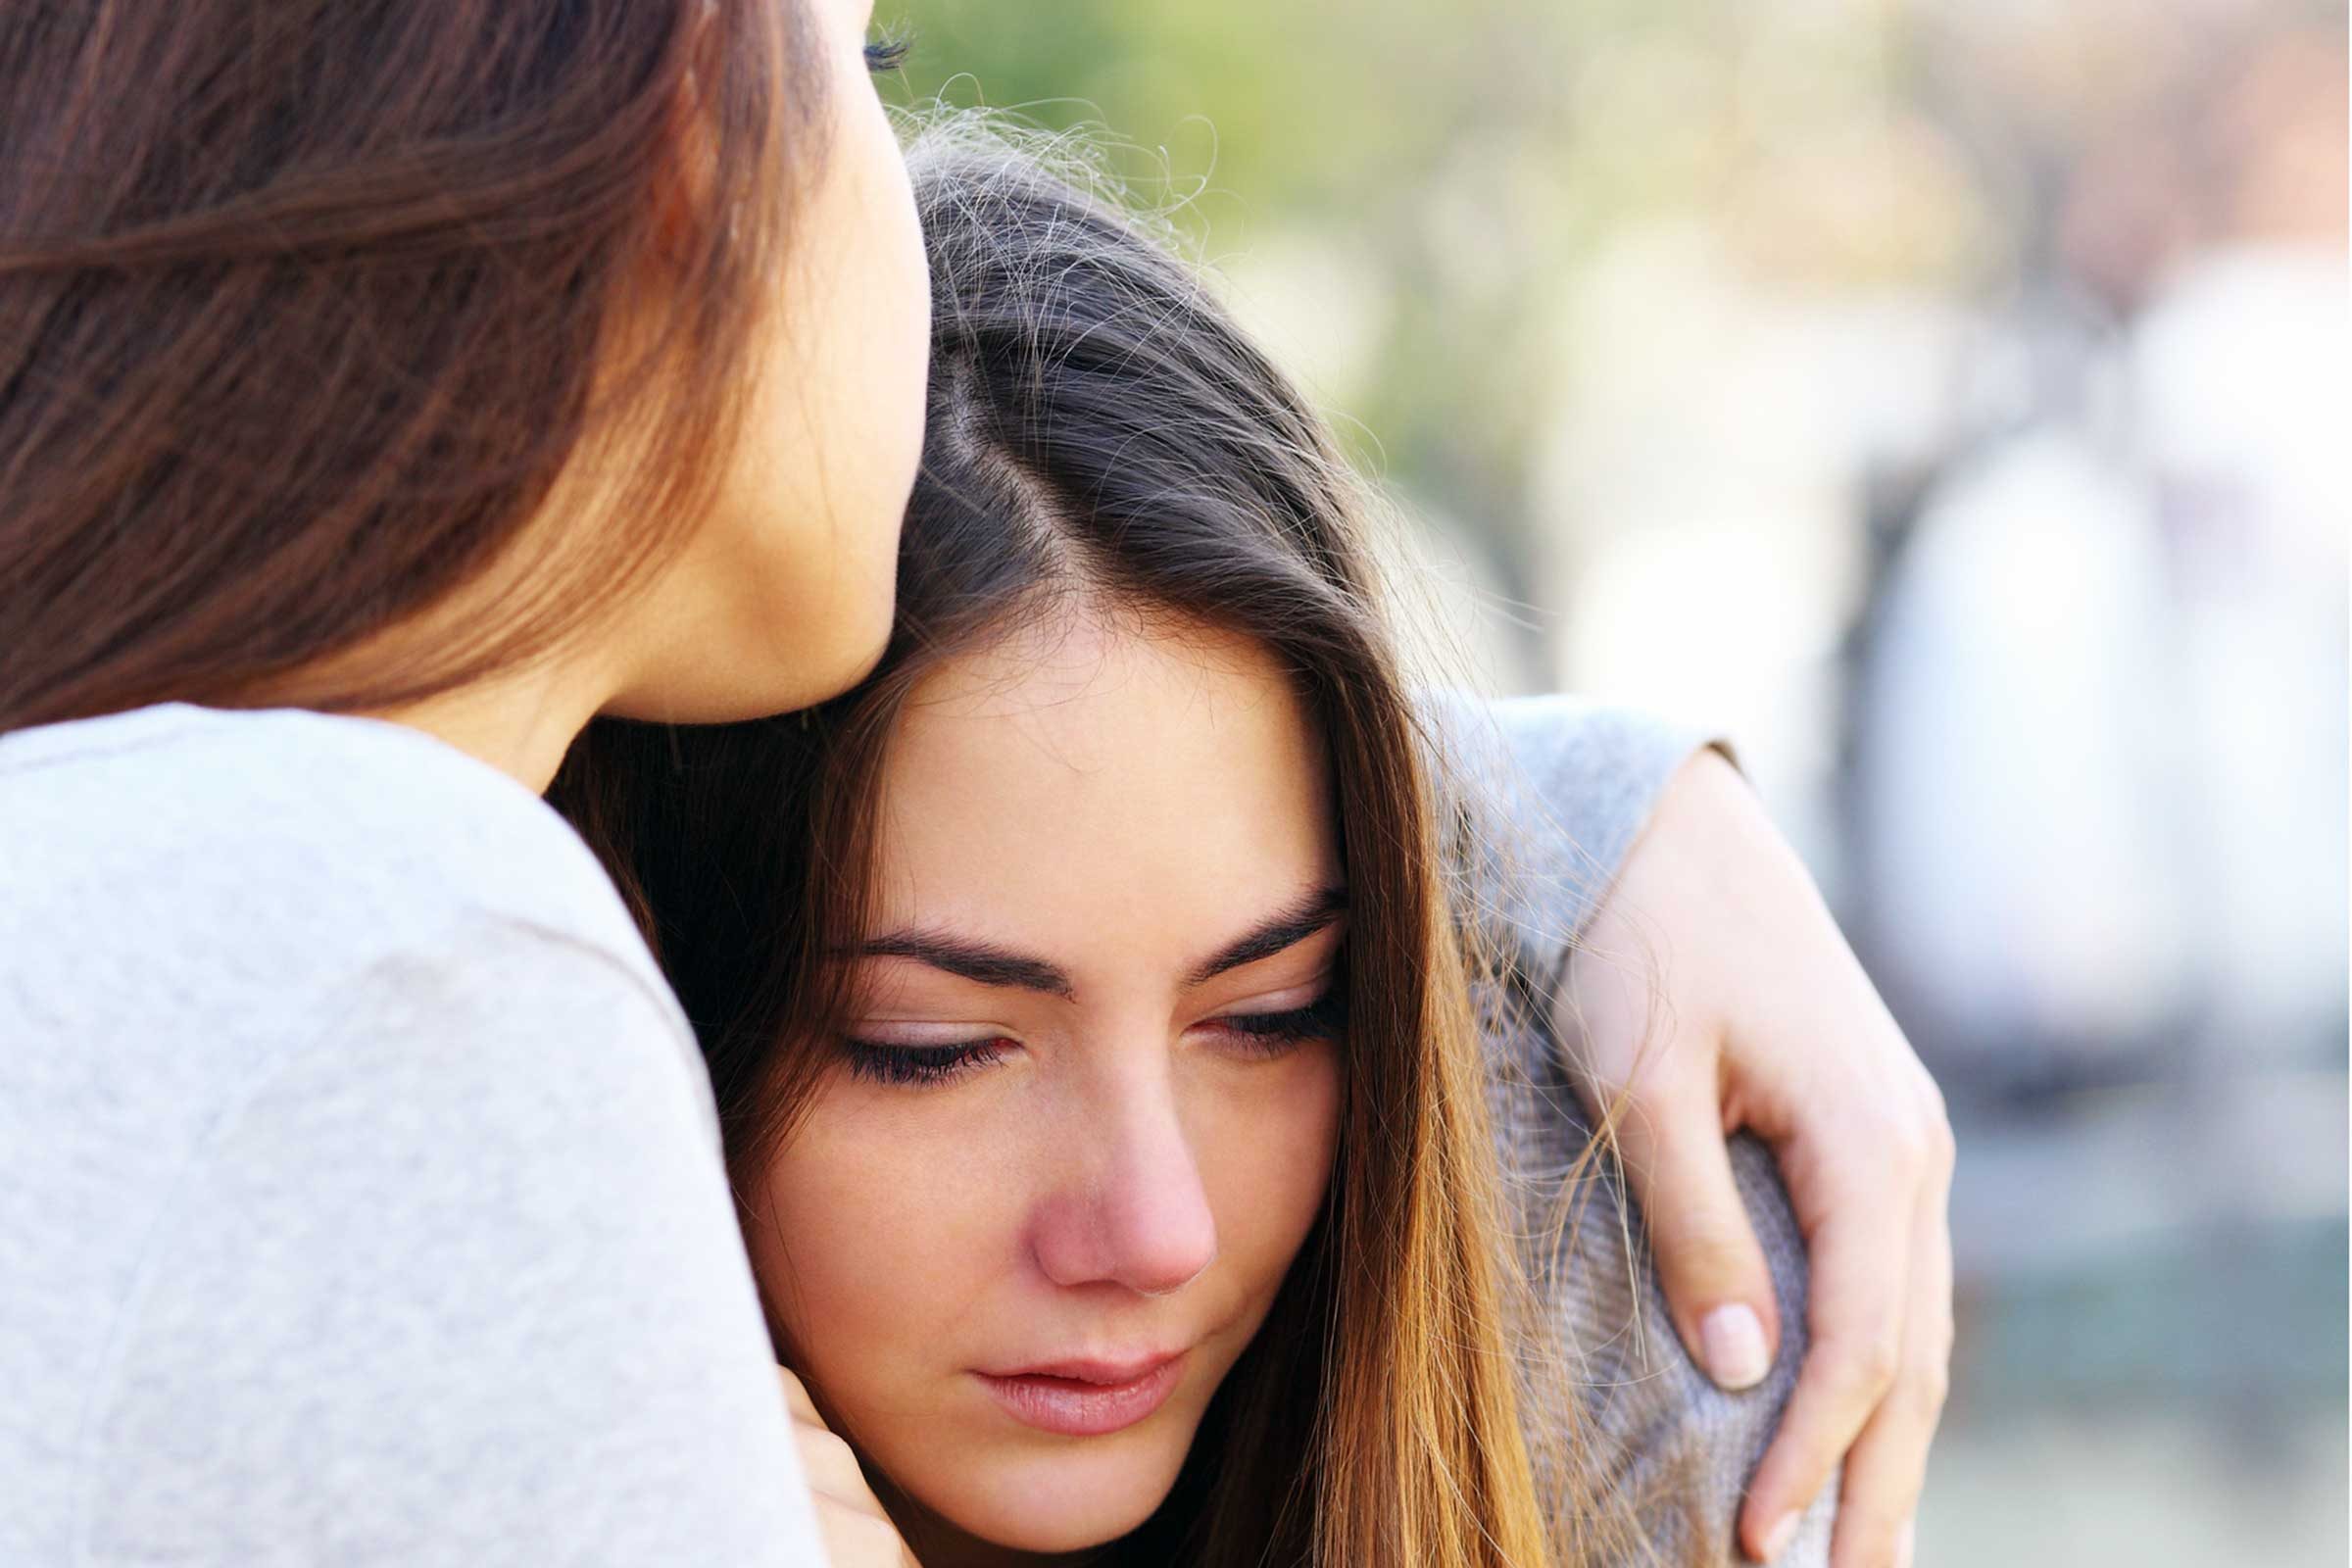 12 Ways to Help Someone with Depression, According to Psychologists